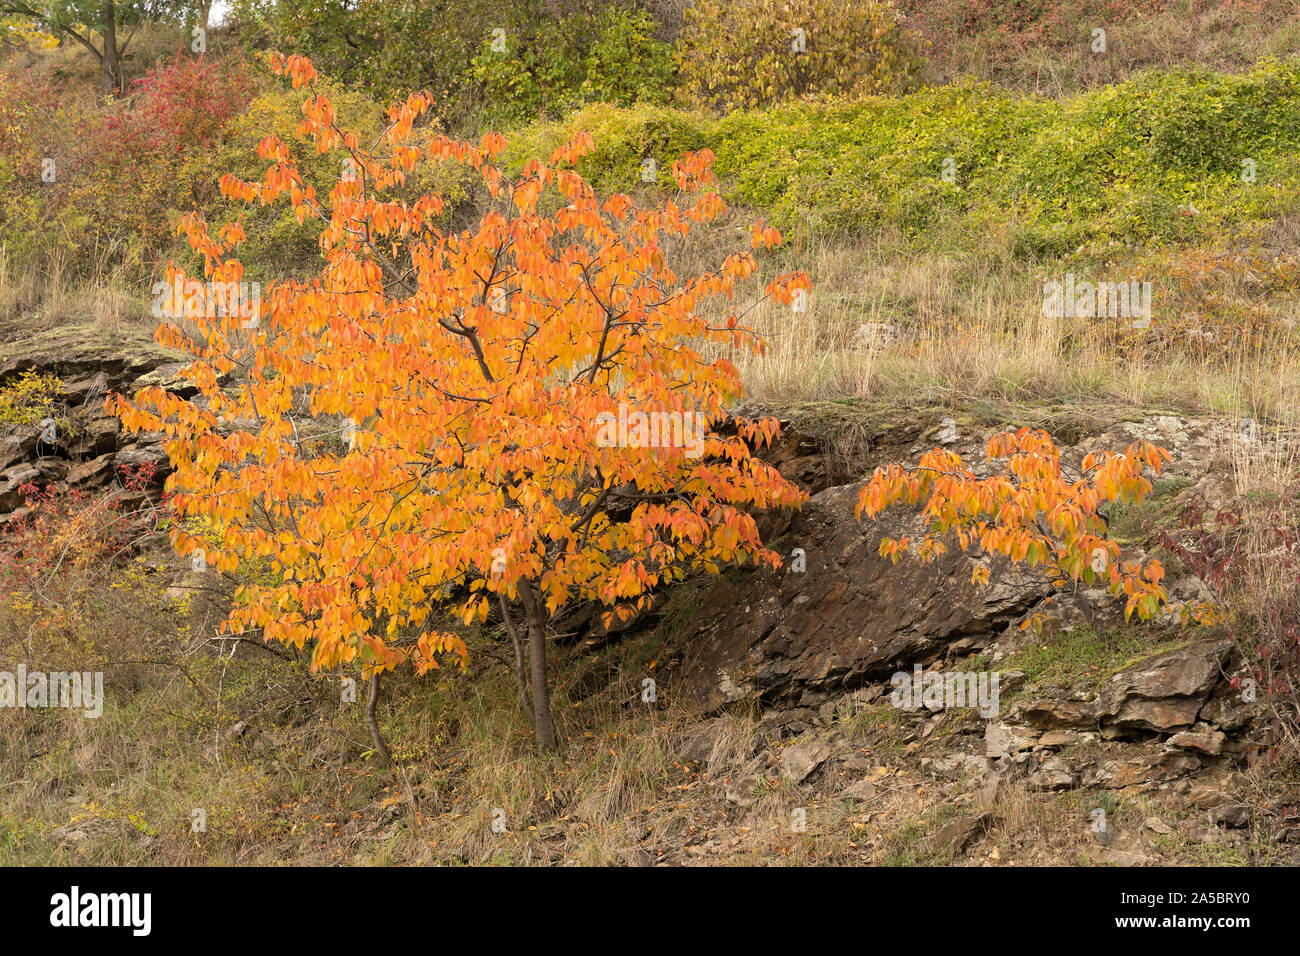 The fiery orange and red leaves of a wild cherry tree (Prunus Avium) in autumn in Lower Austria Stock Photo